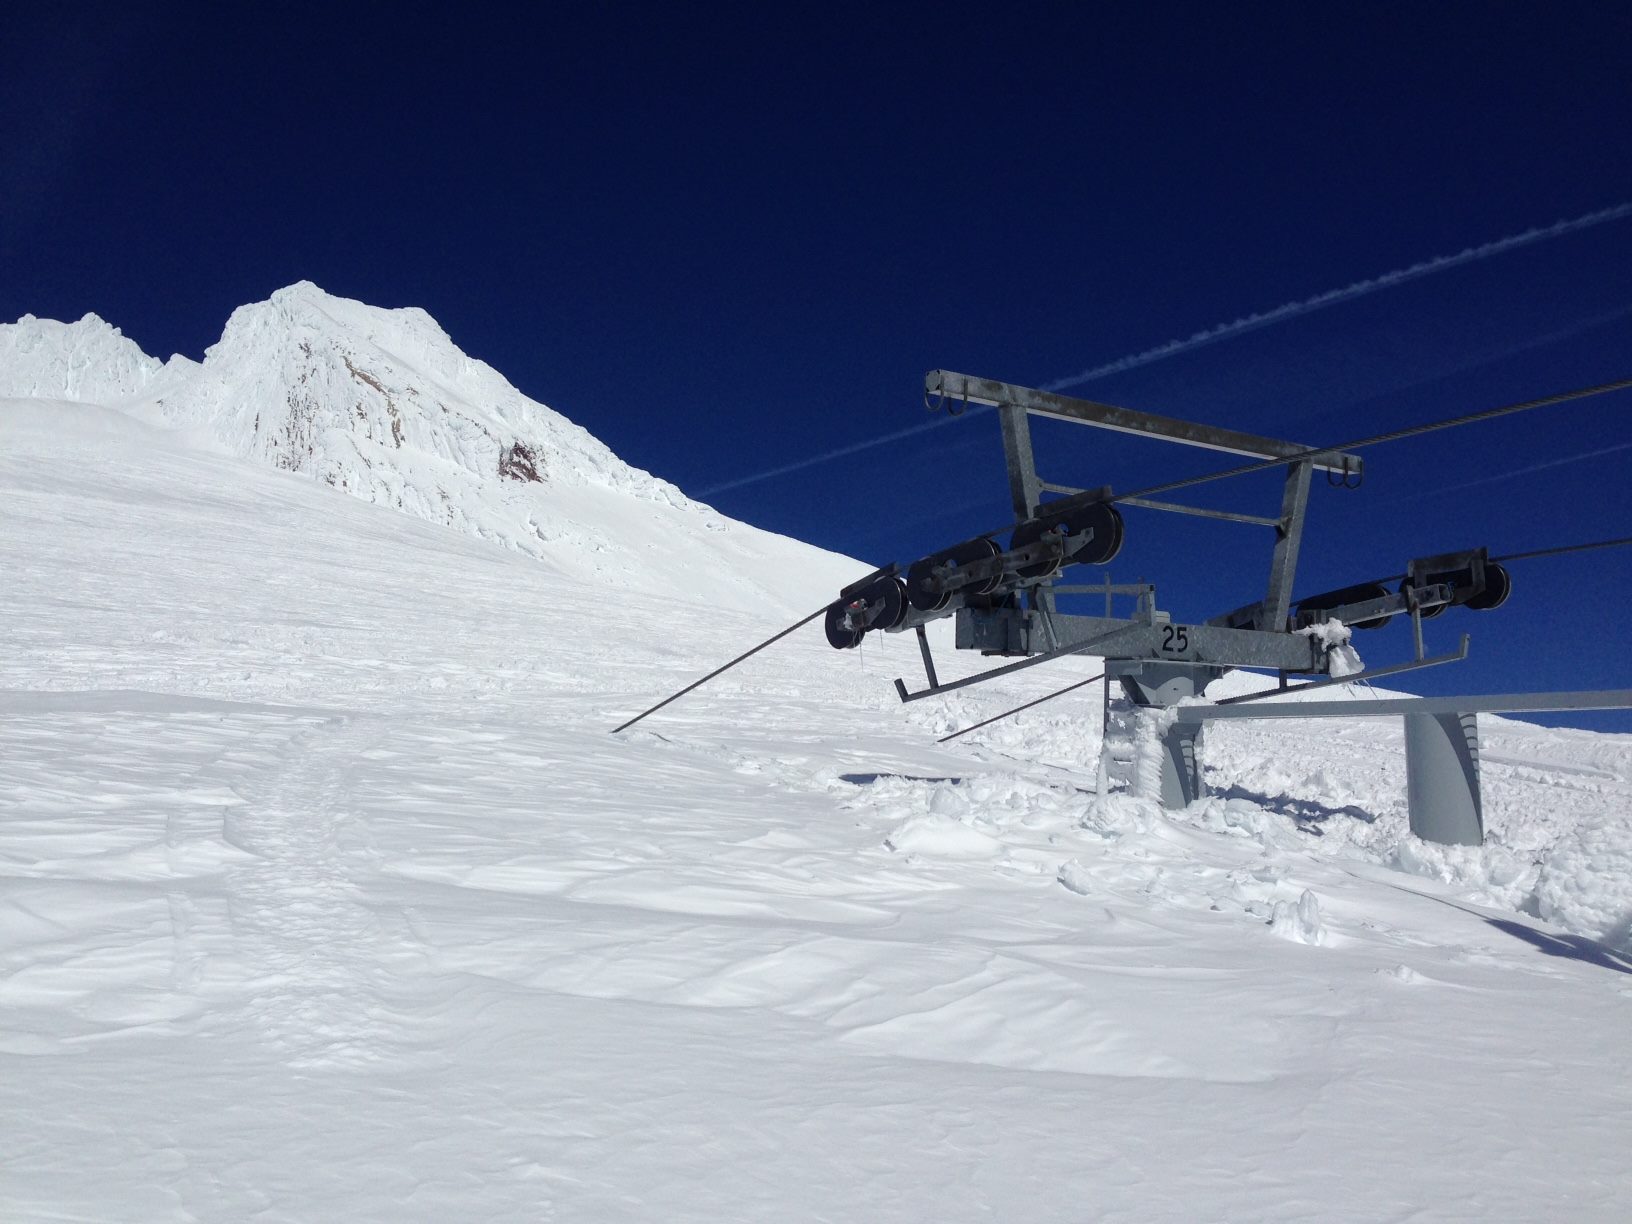 Palmer Chairlift, Mt. Hood, OR on March 17th, 2016. photo: timberline lodge